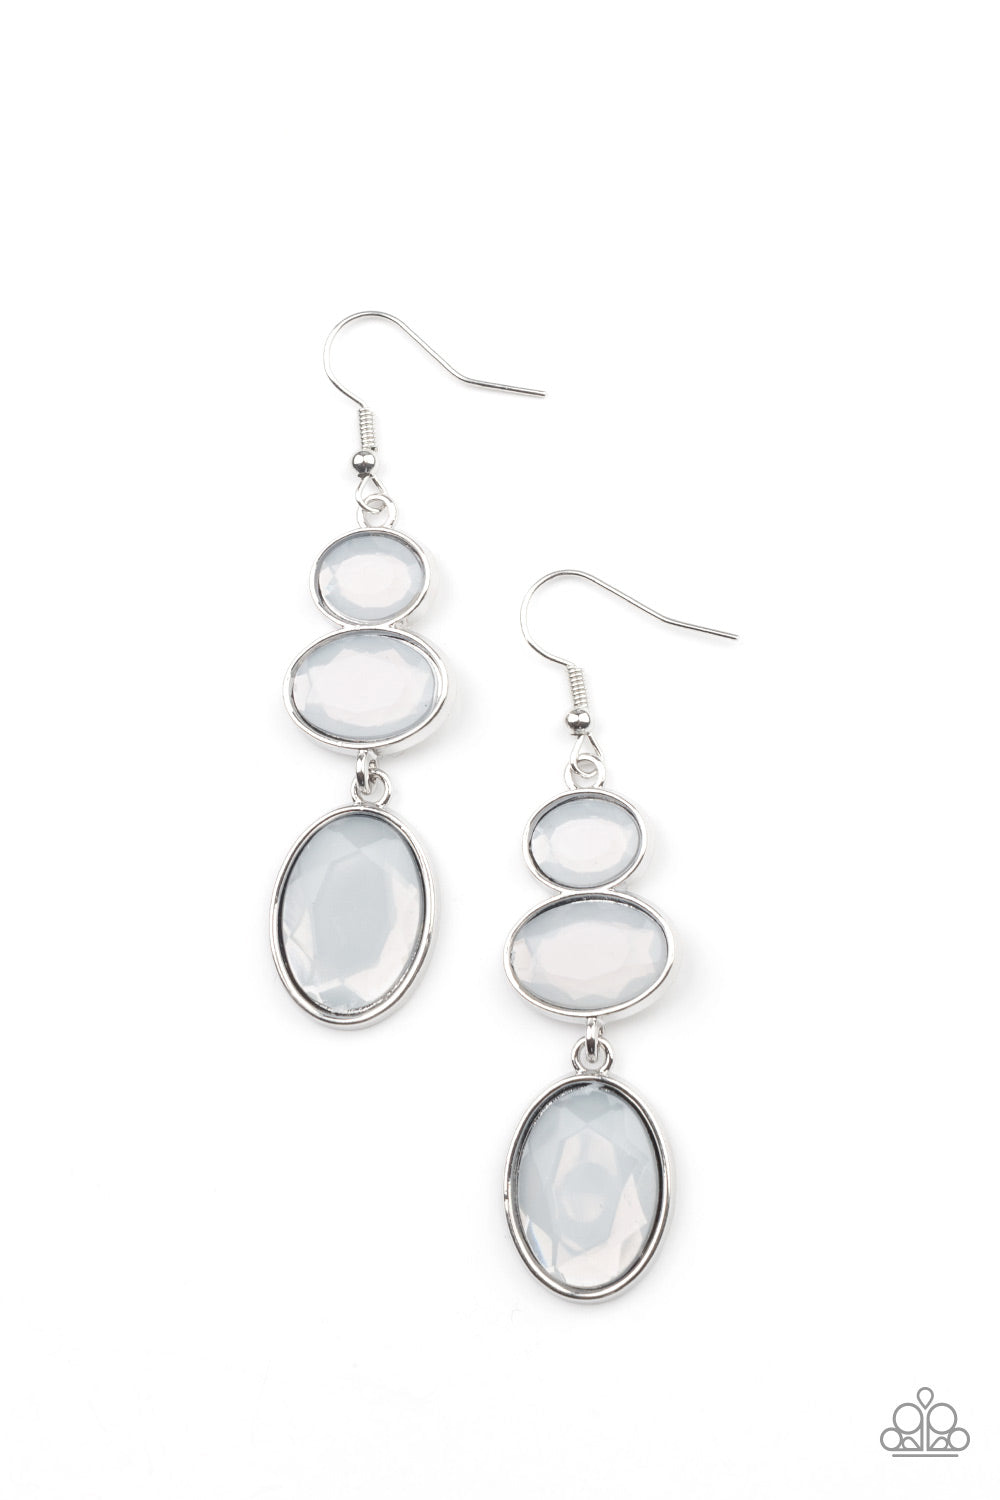 Paparazzi Tiers Of Tranquility - White Earrings - A Finishing Touch Jewelry